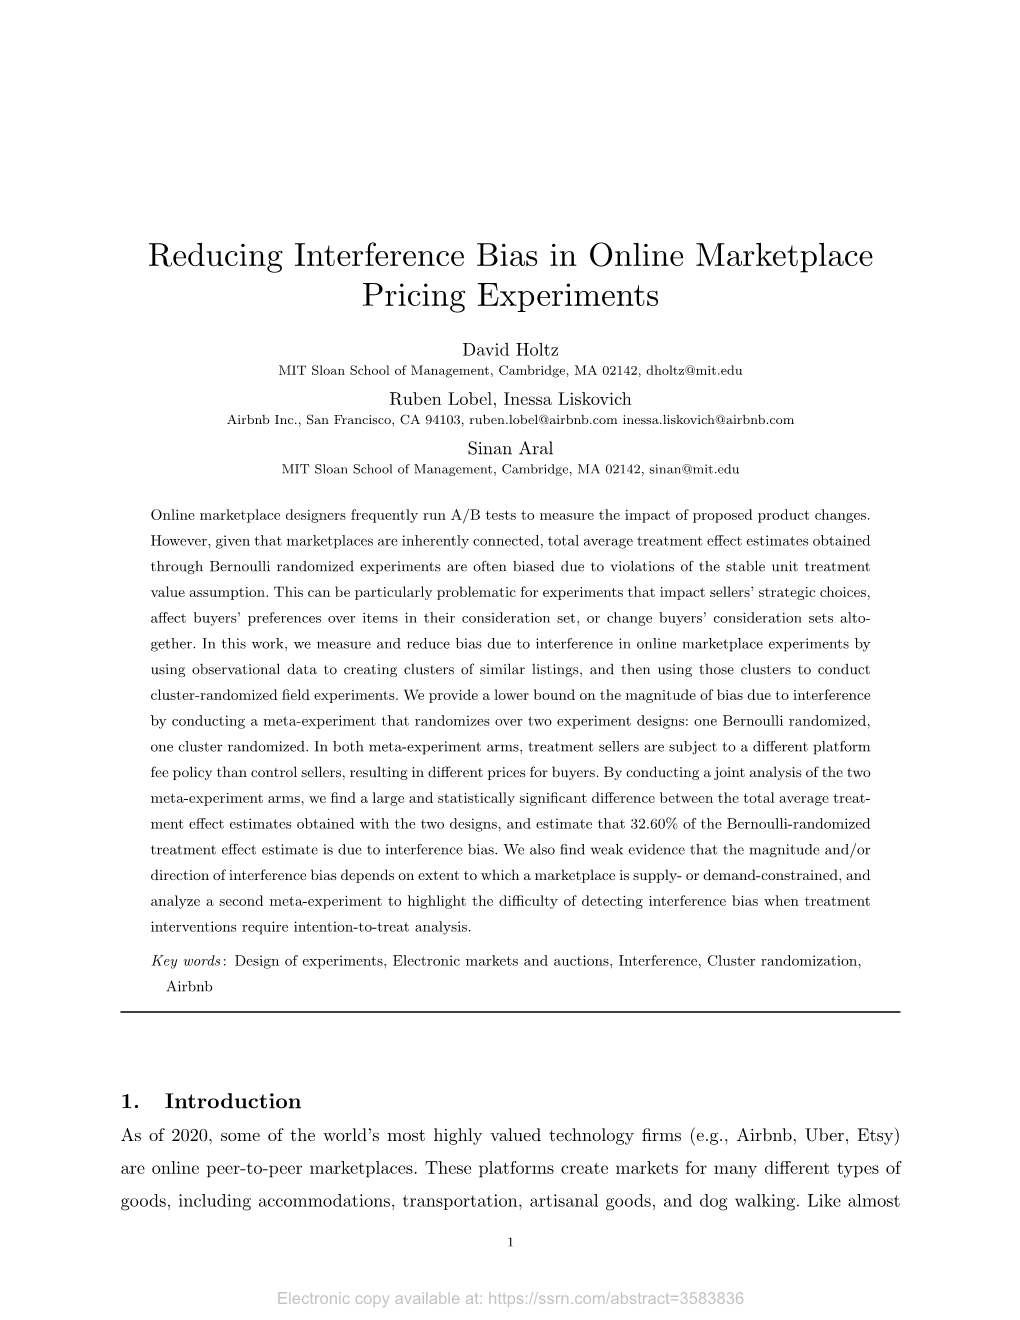 Reducing Interference Bias in Online Marketplace Pricing Experiments